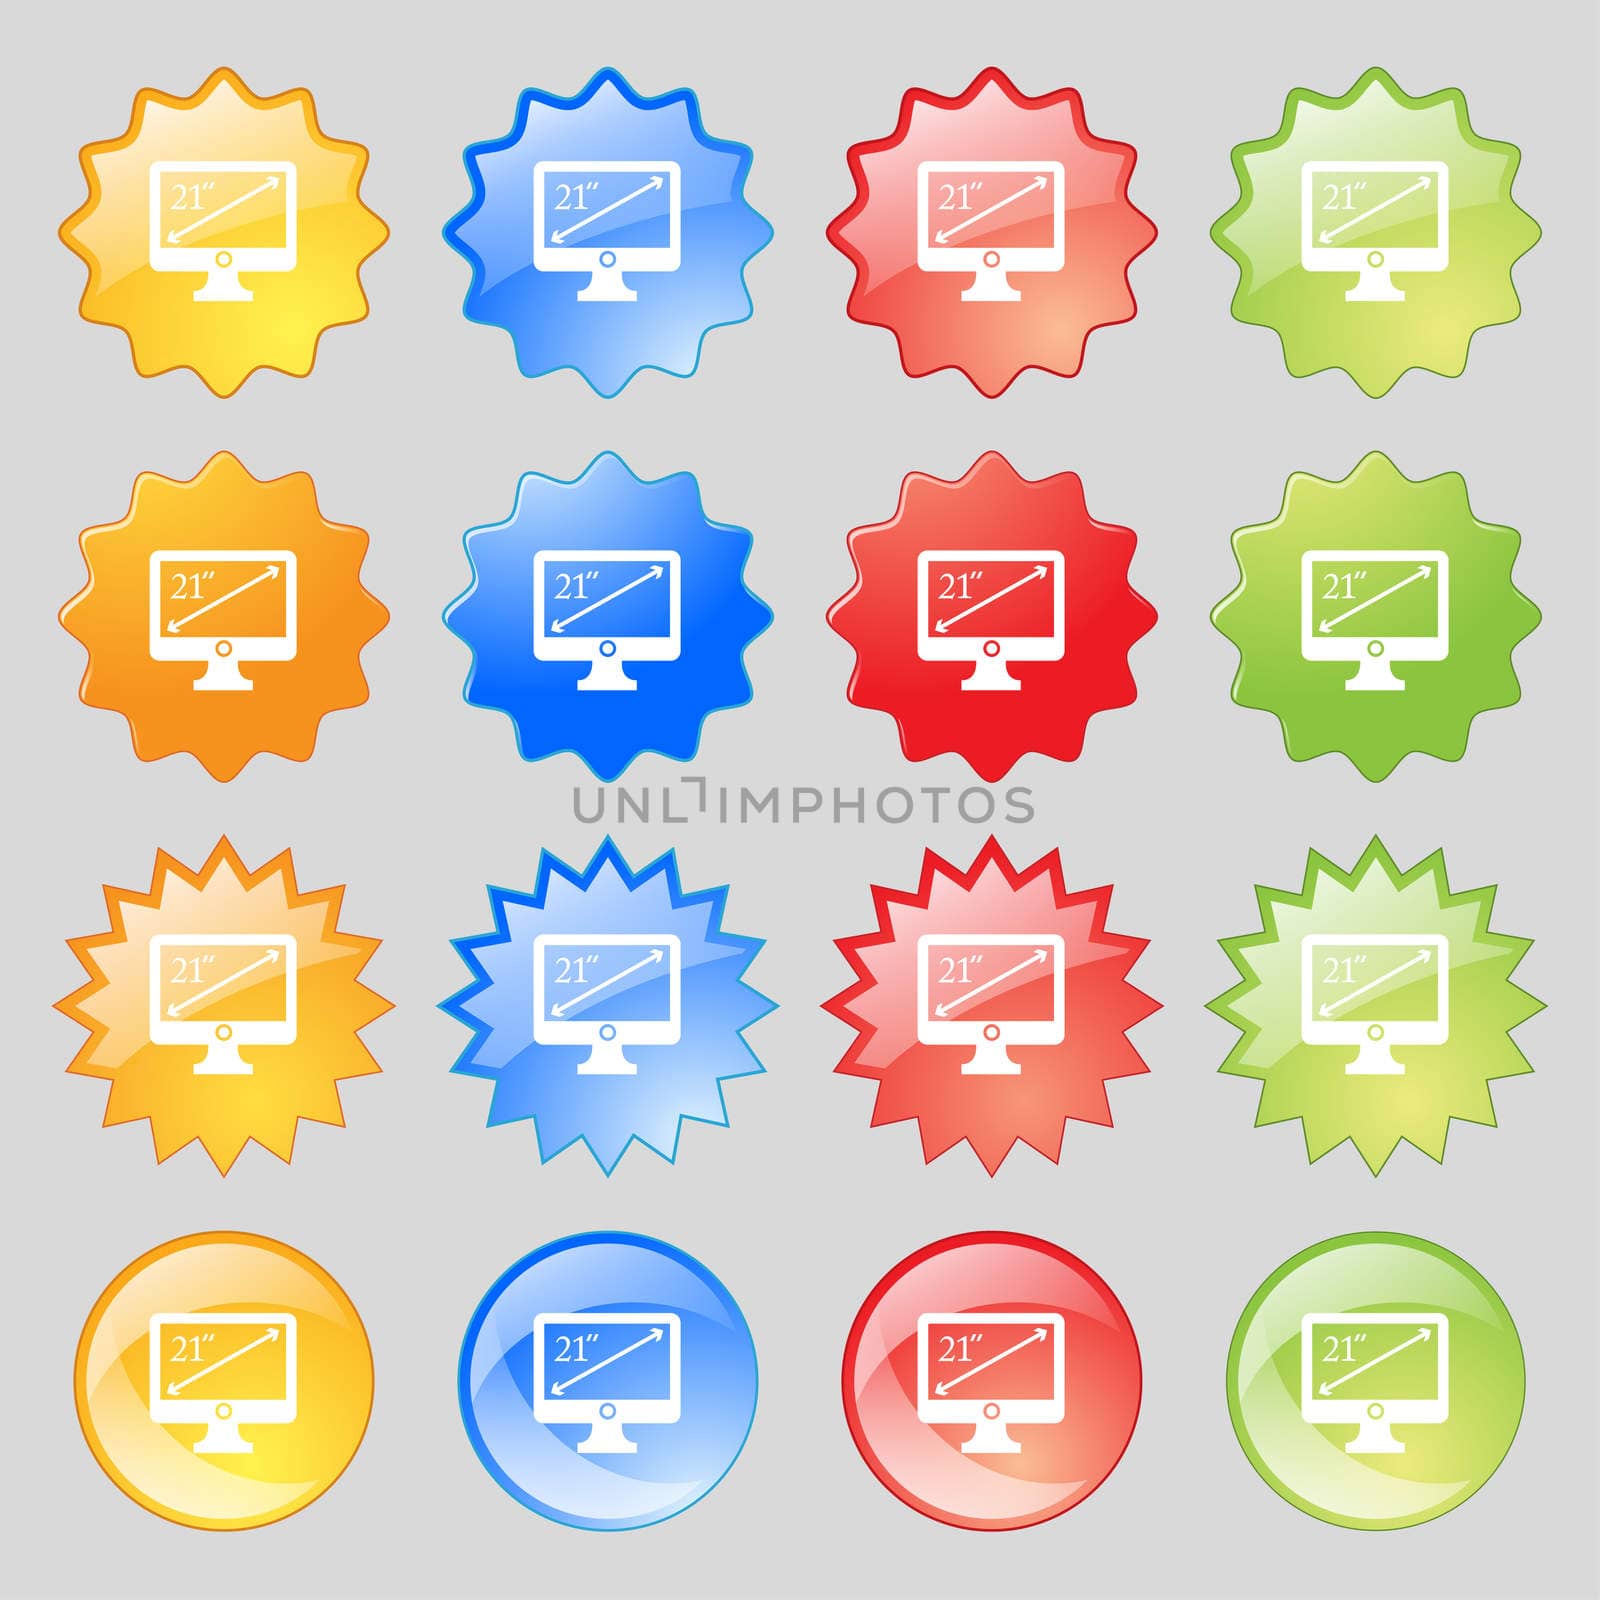 diagonal of the monitor 21 inches icon sign. Big set of 16 colorful modern buttons for your design. illustration